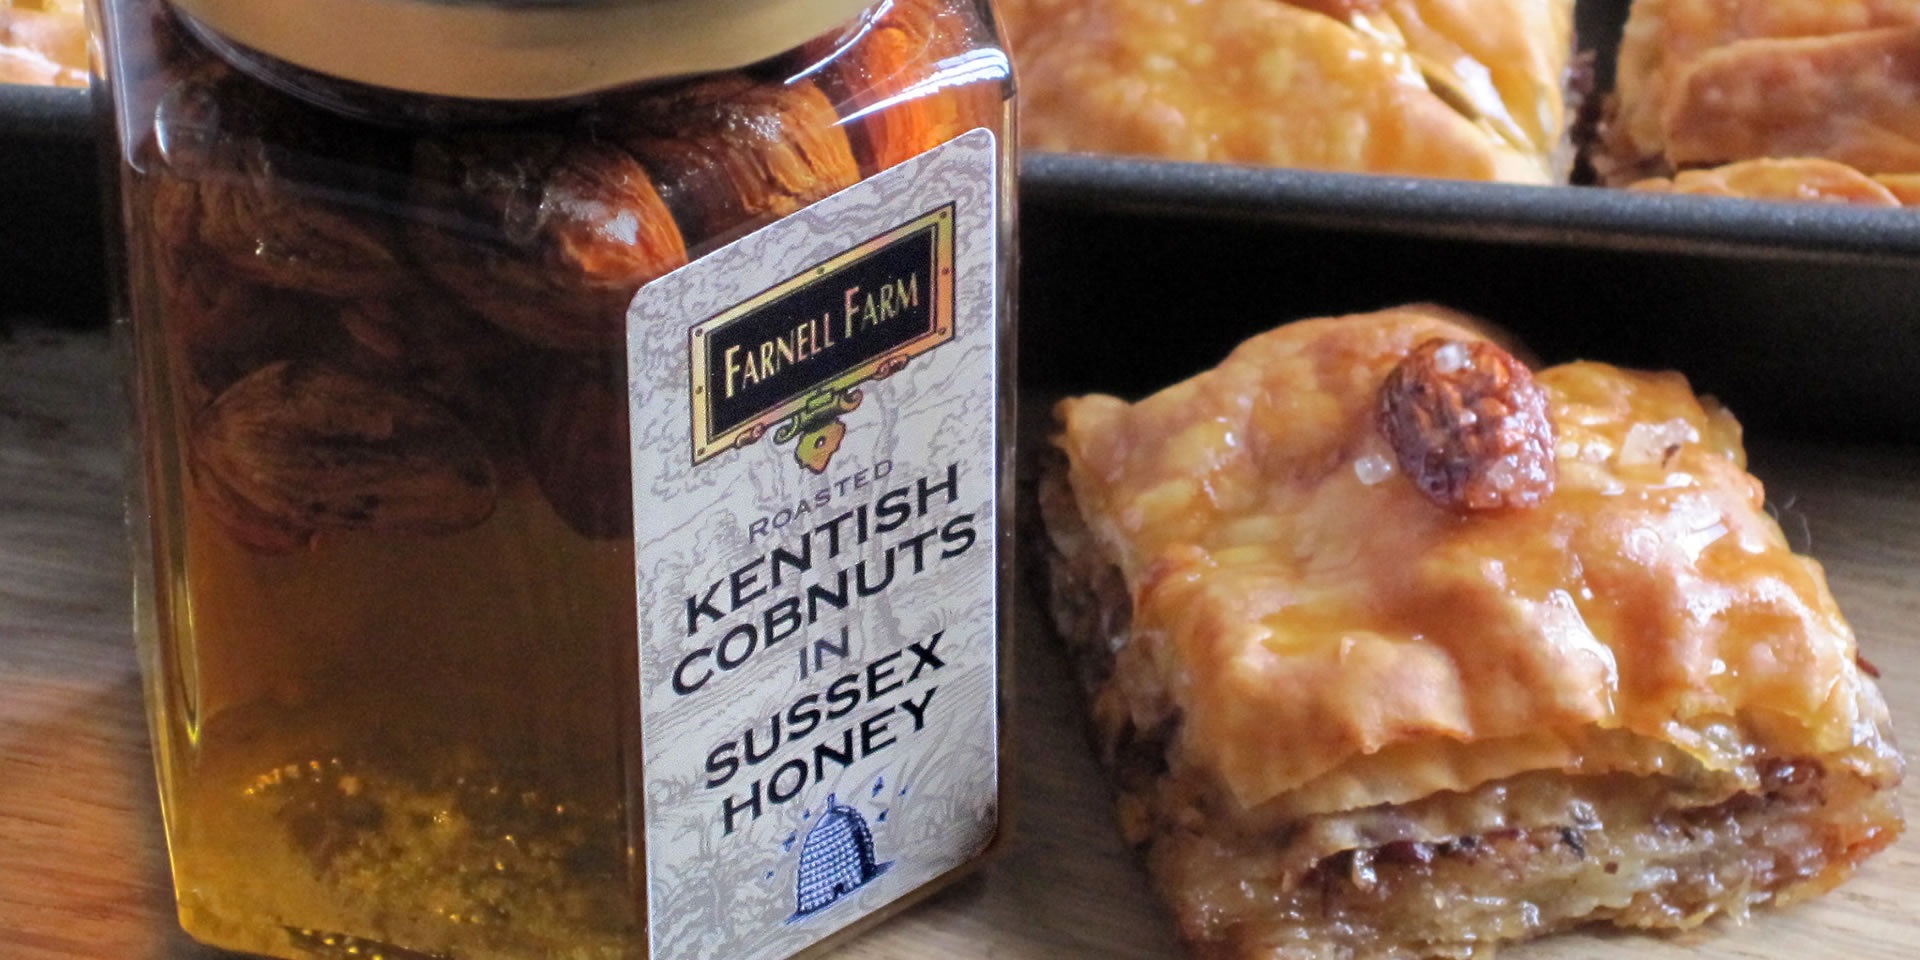 Baclava With Whole Roasted Kentish Cobnuts in Sussex Honey